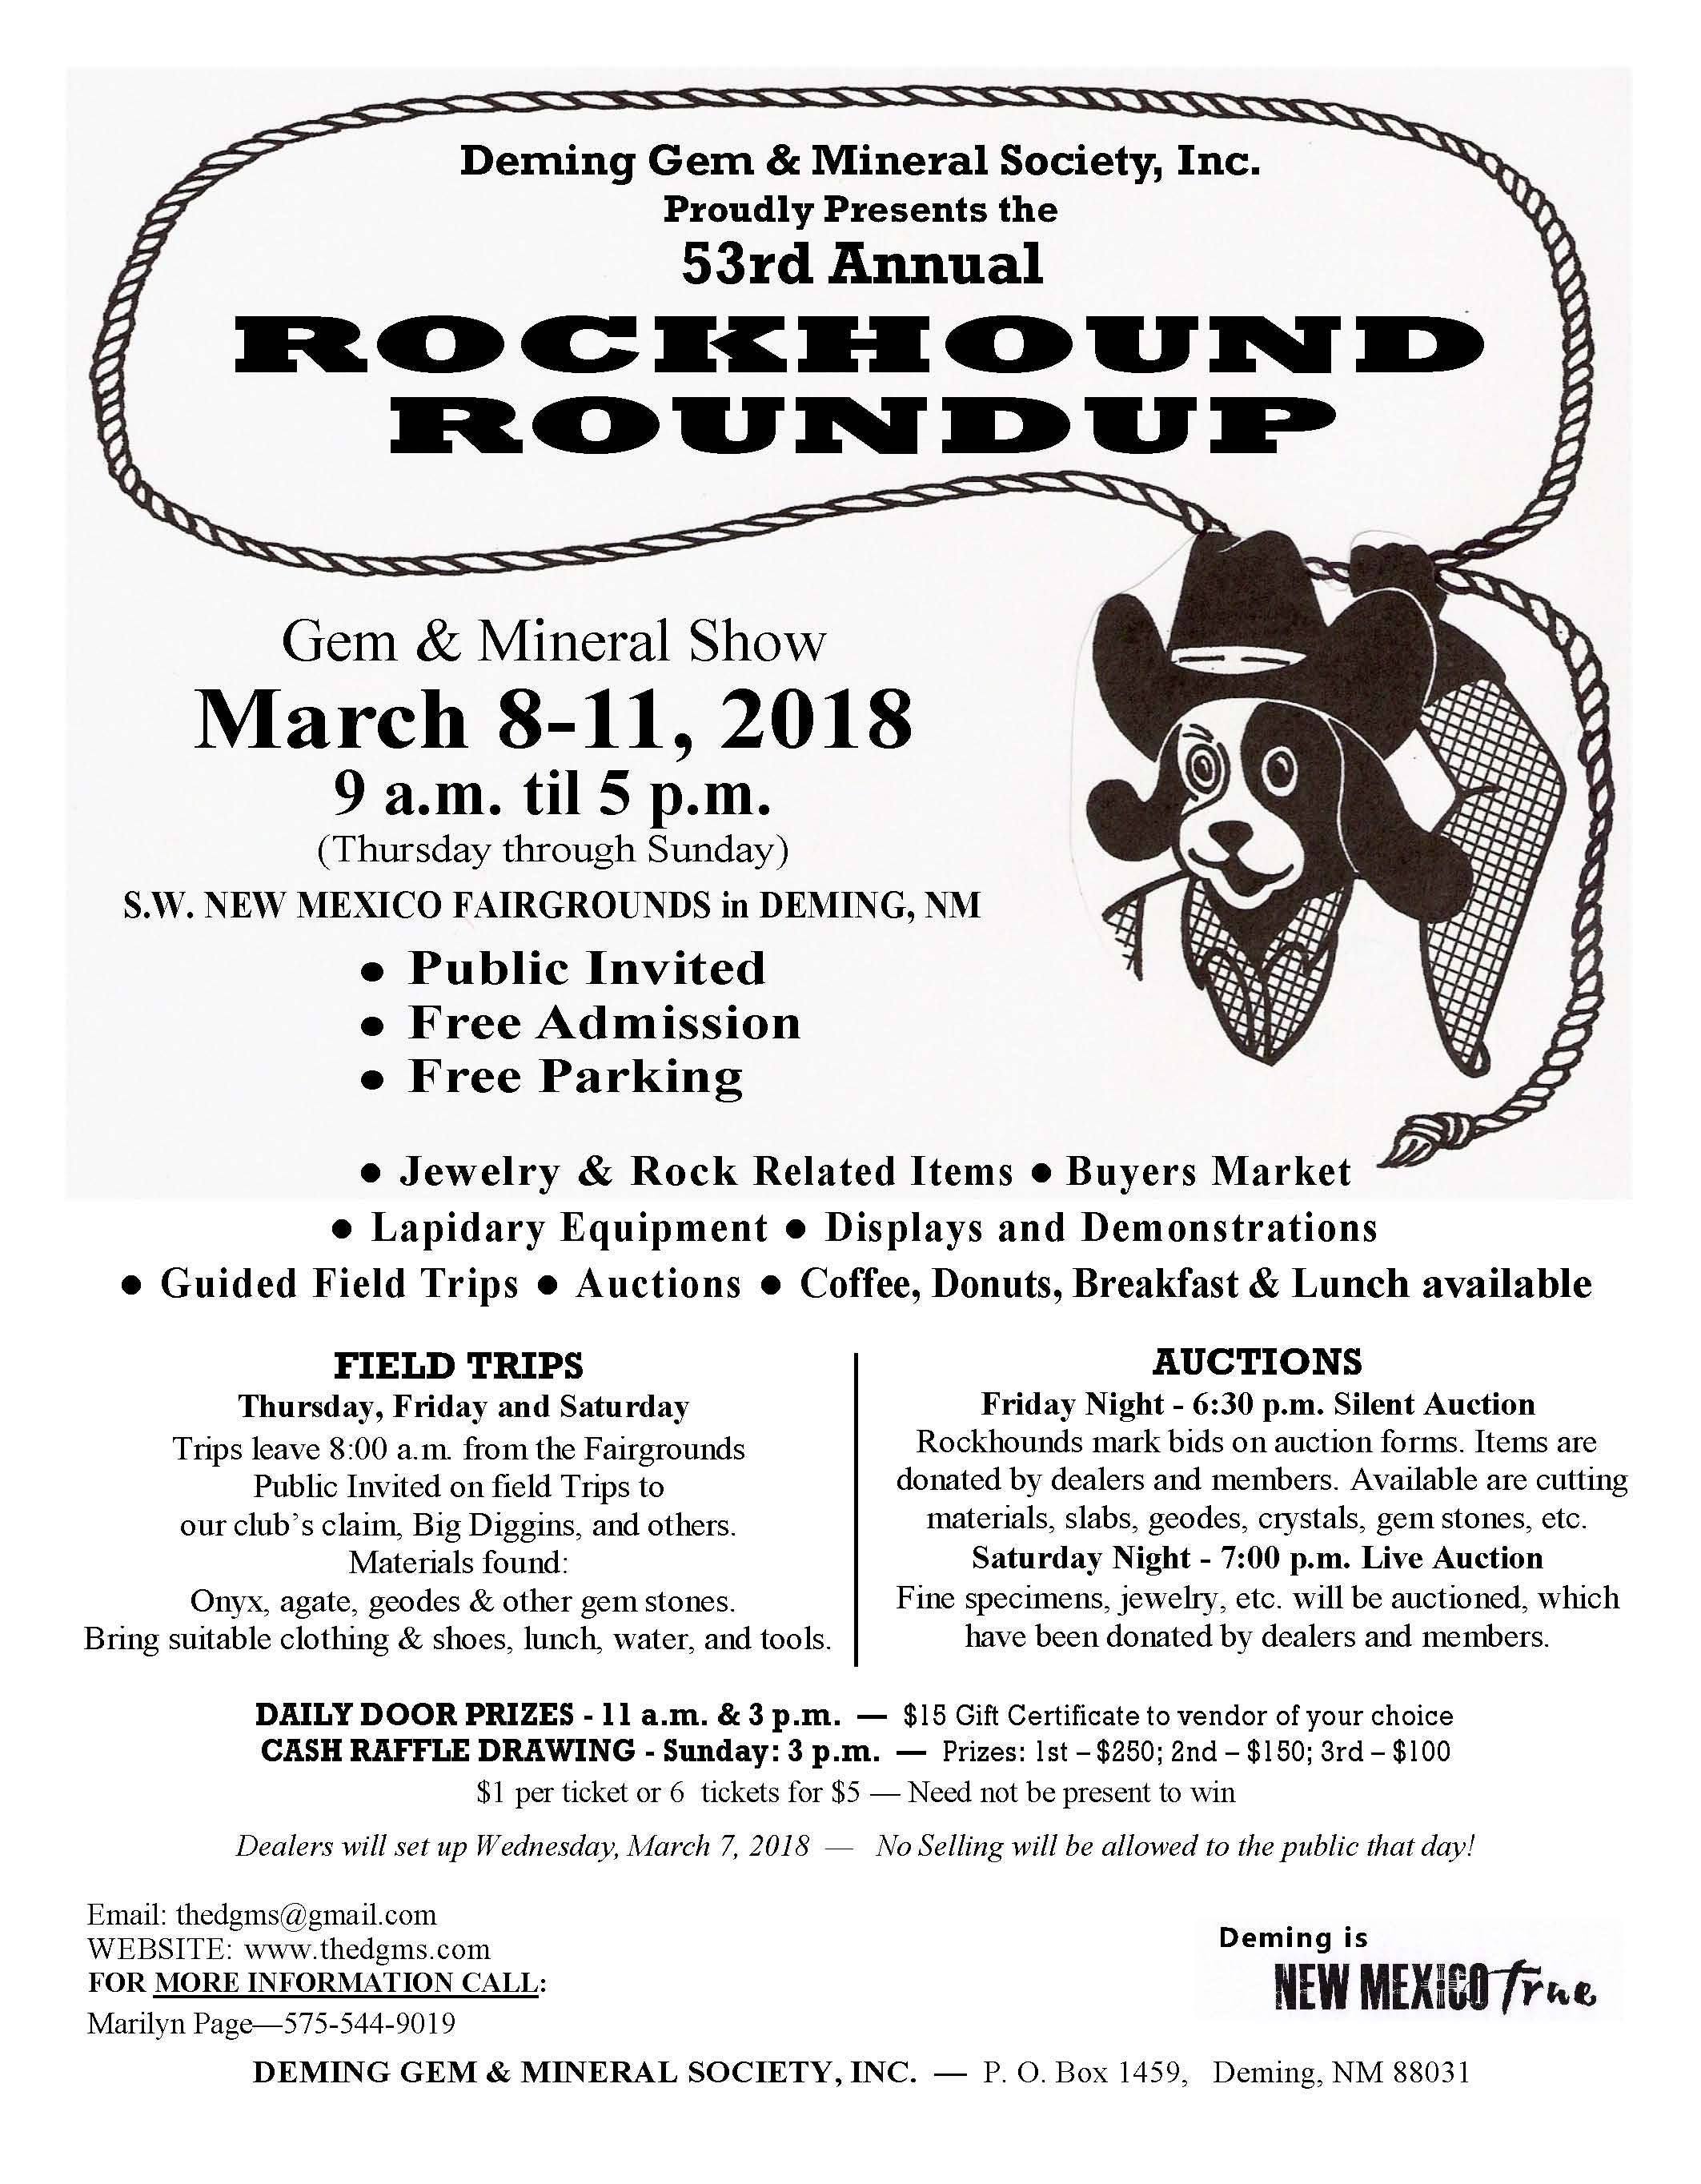 Rockhound Roundup Deming Annual Gem & Mineral Show 2018 Silver City